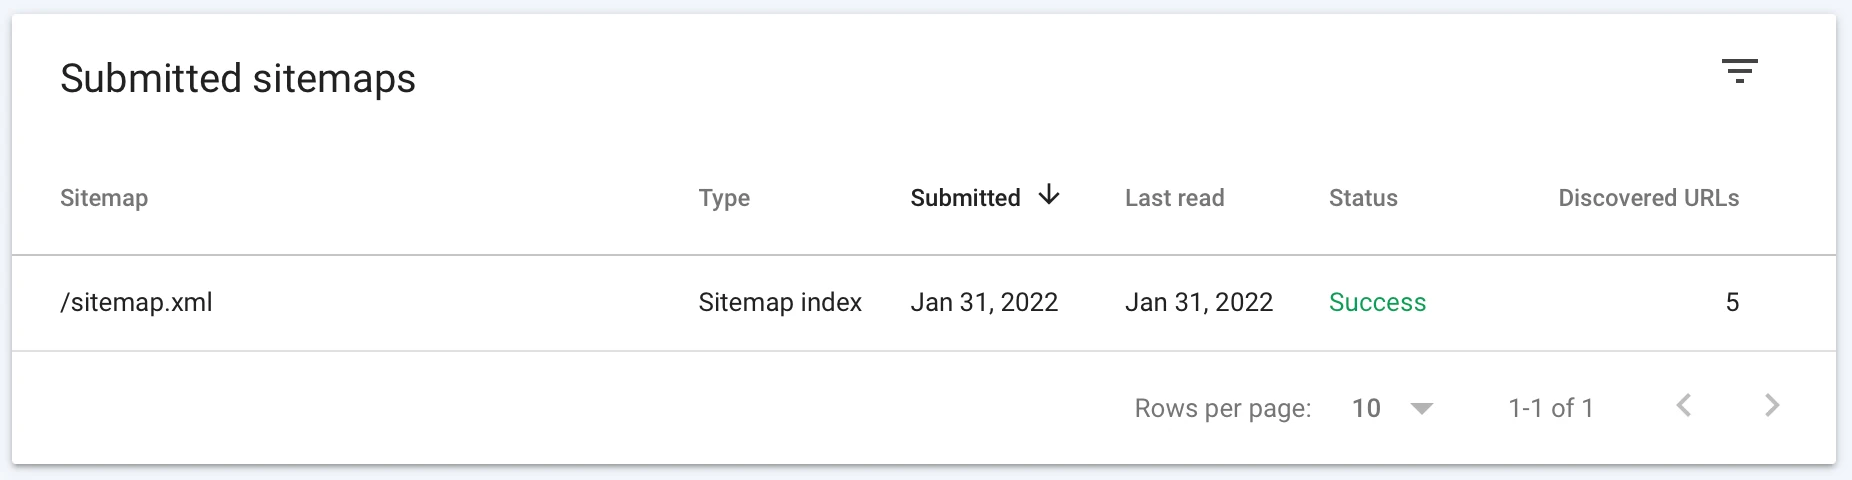 Submitted sitemaps